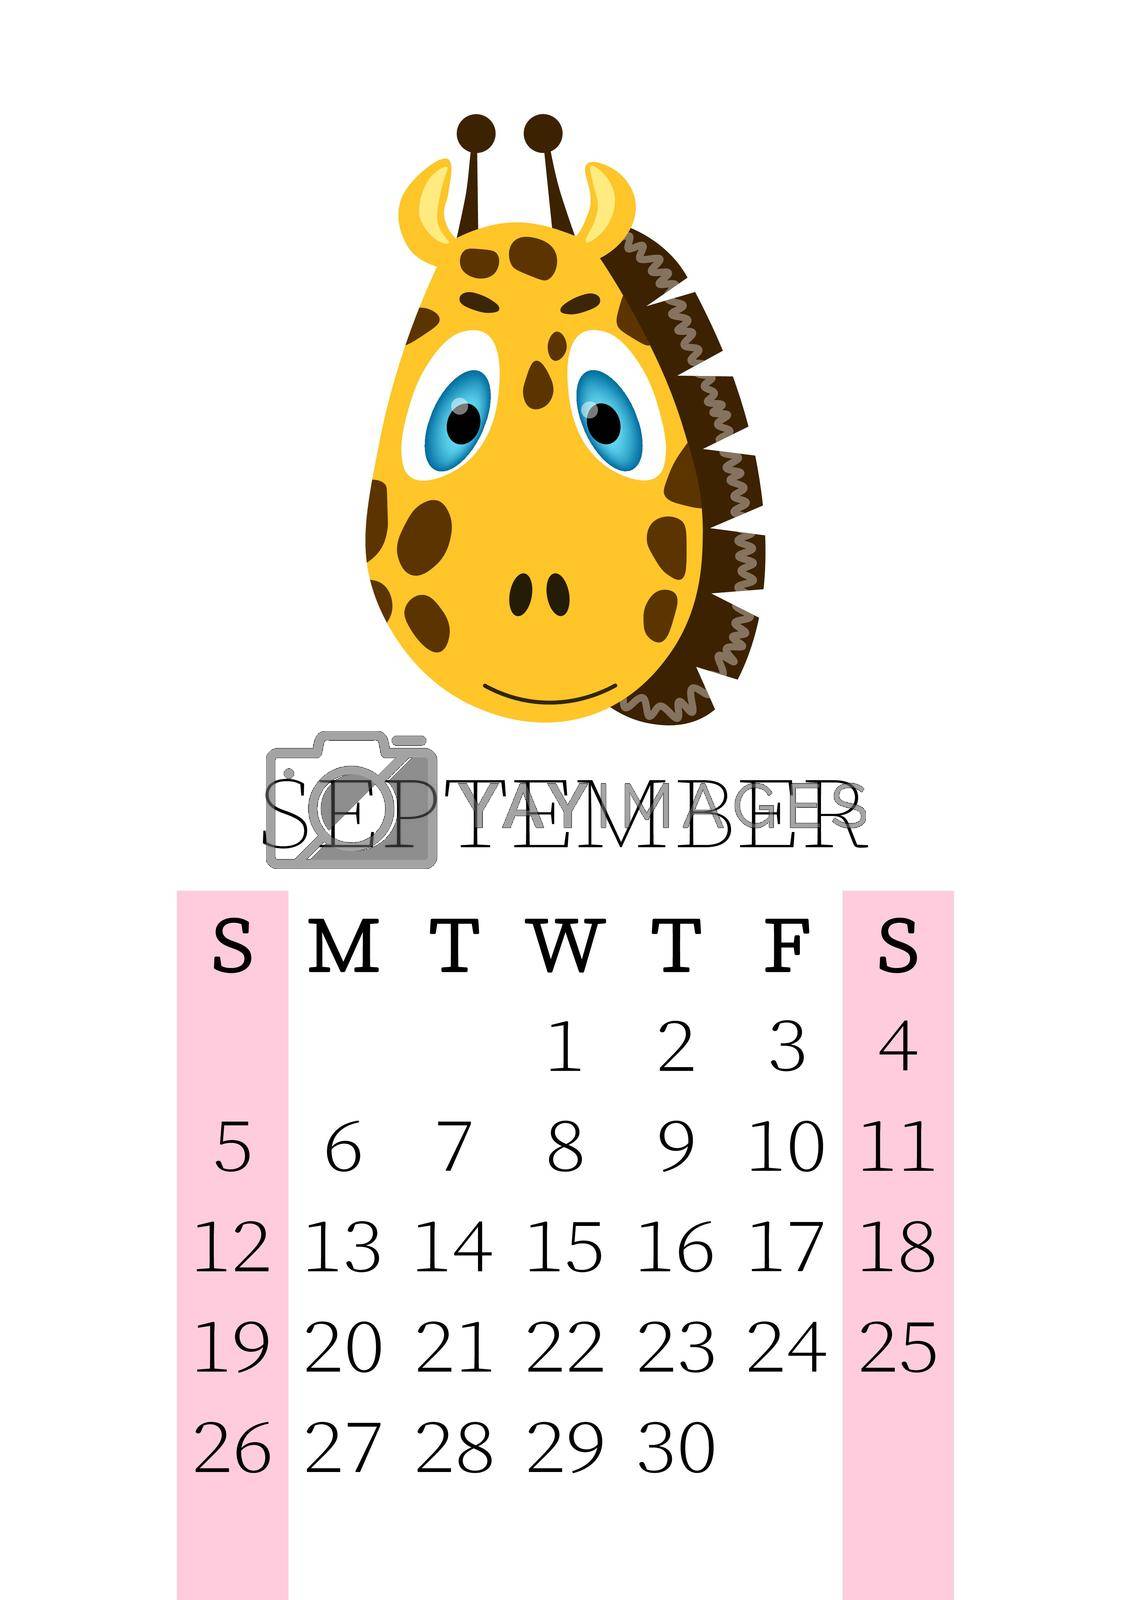 Royalty free image of Calendar 2021. Monthly calendar for September 2021 from Sunday to Saturday. Yearly Planner. Templates with cute hand drawn face animals. Vector illustration. Great for kids. Calendar page for print. by allaku